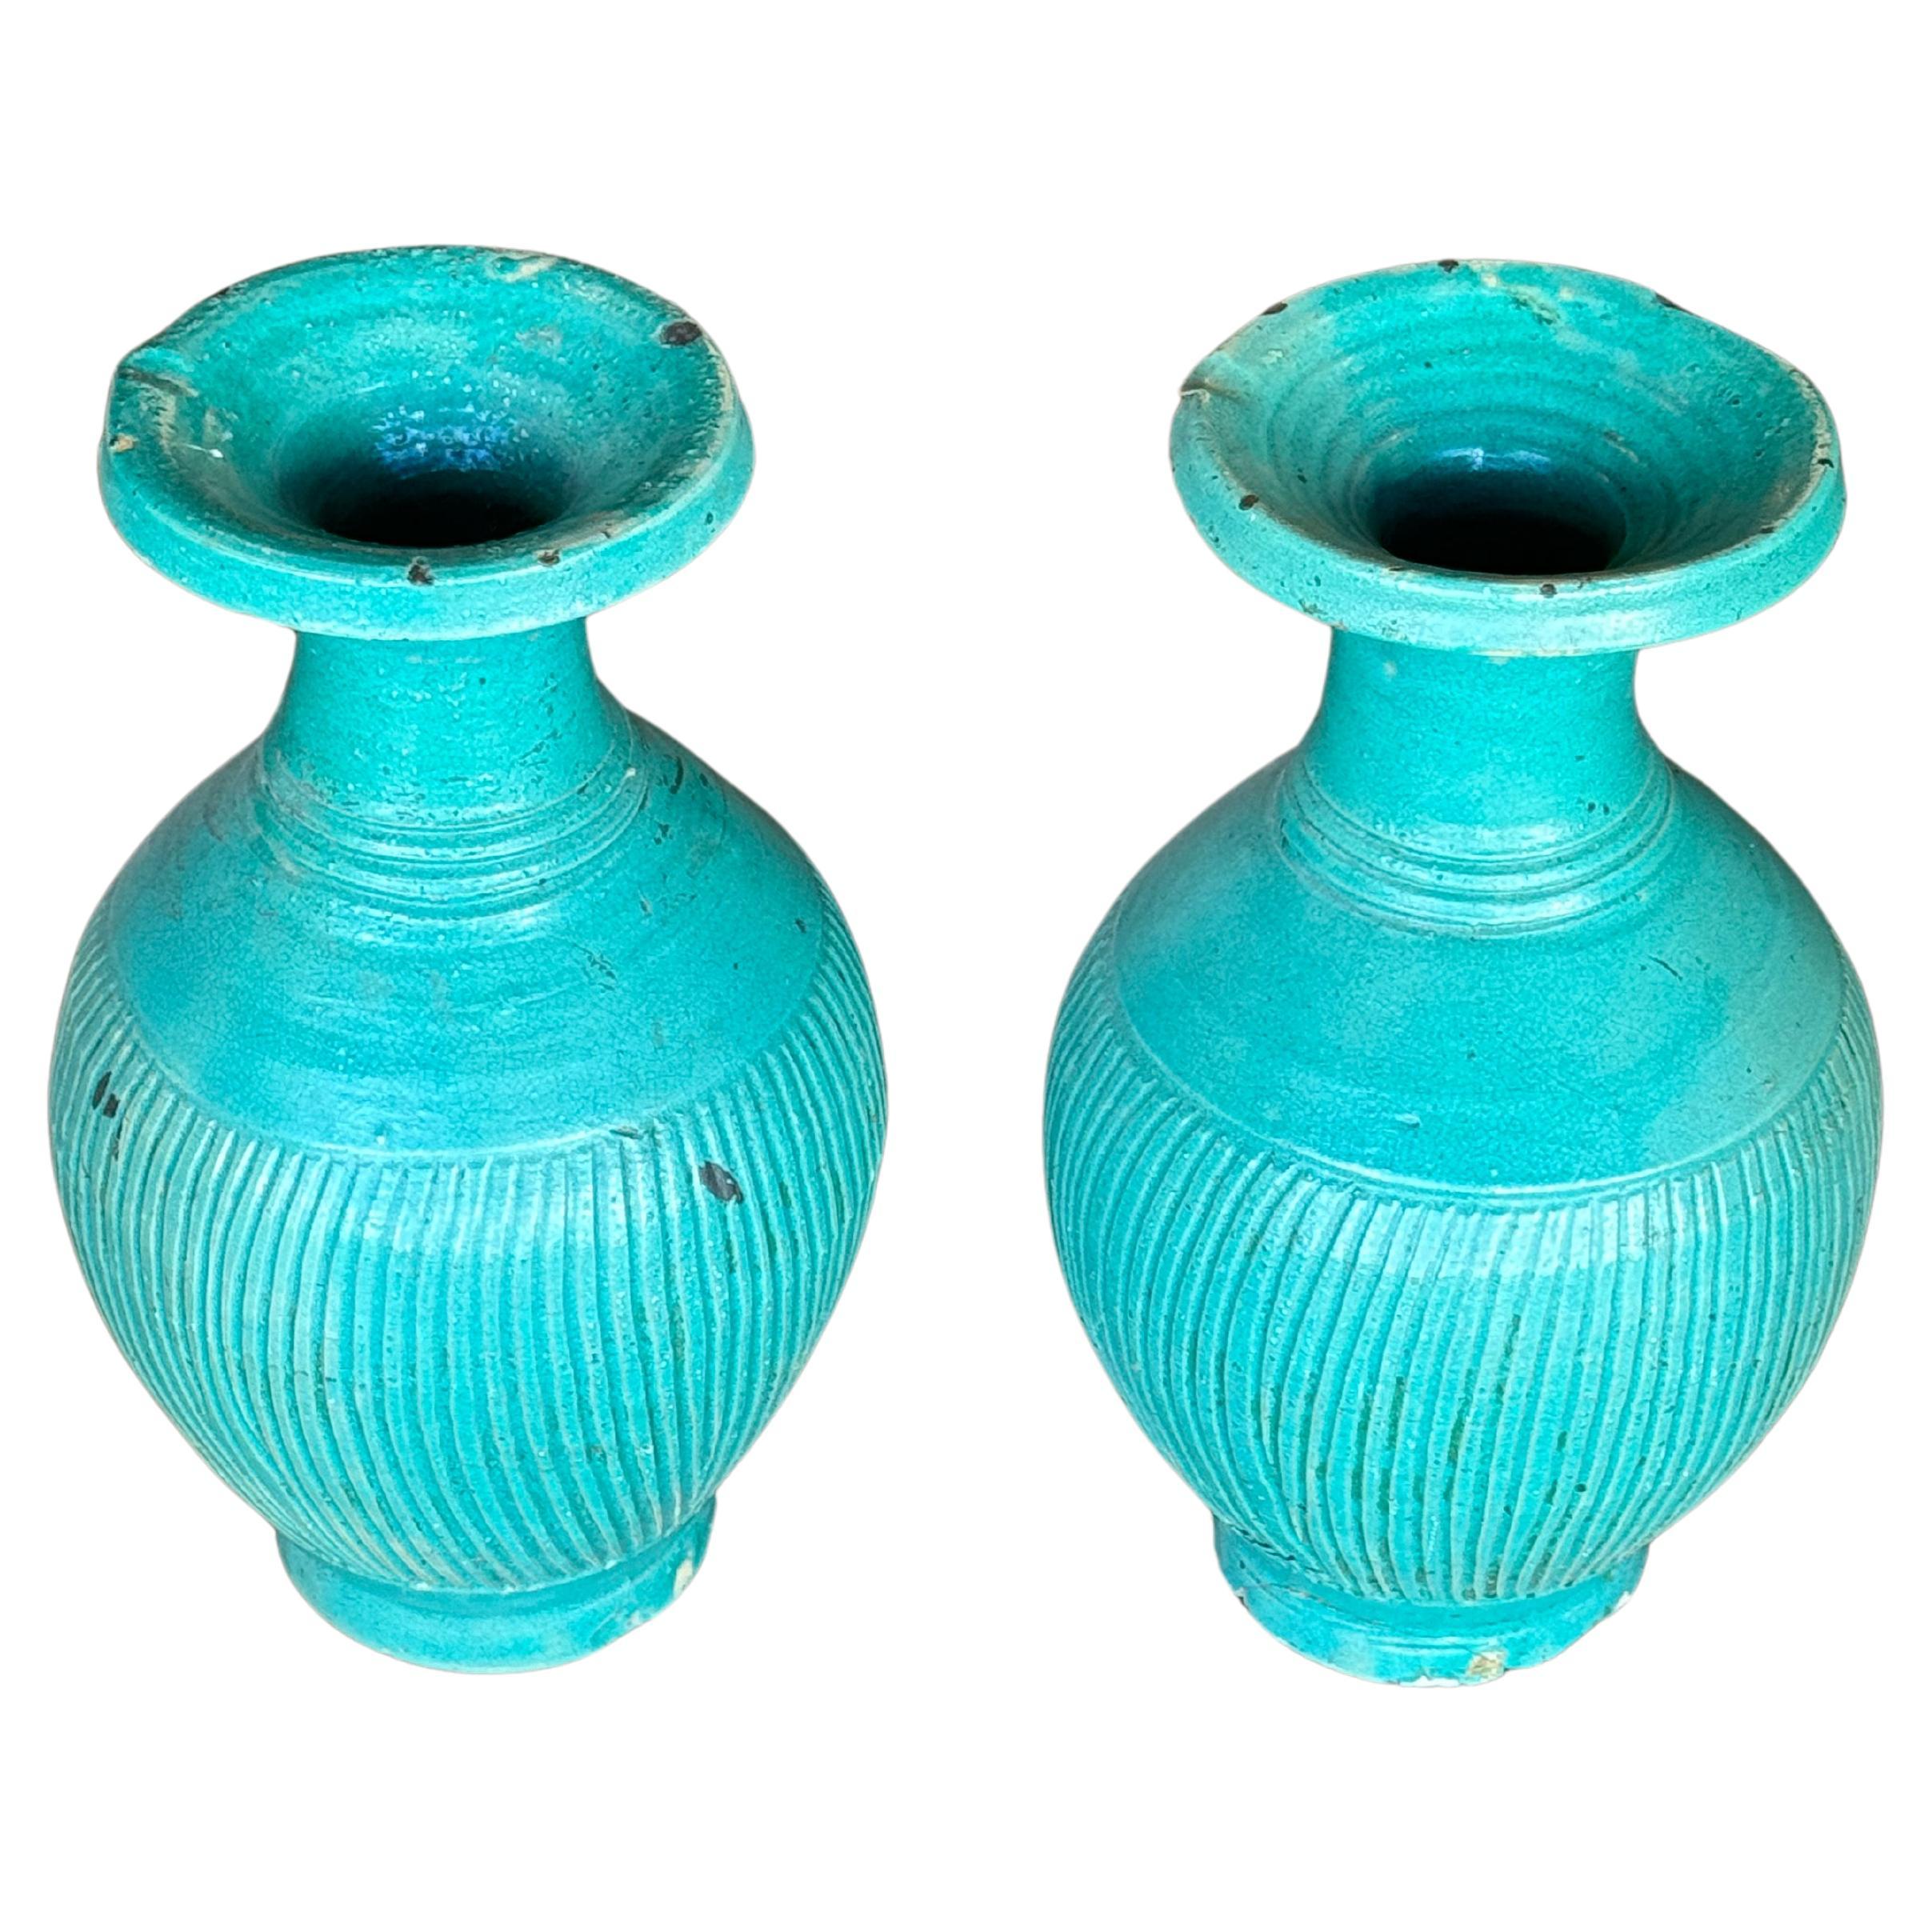 Tall Turquoise Vintage Moroccan Handled Vase (Pair)